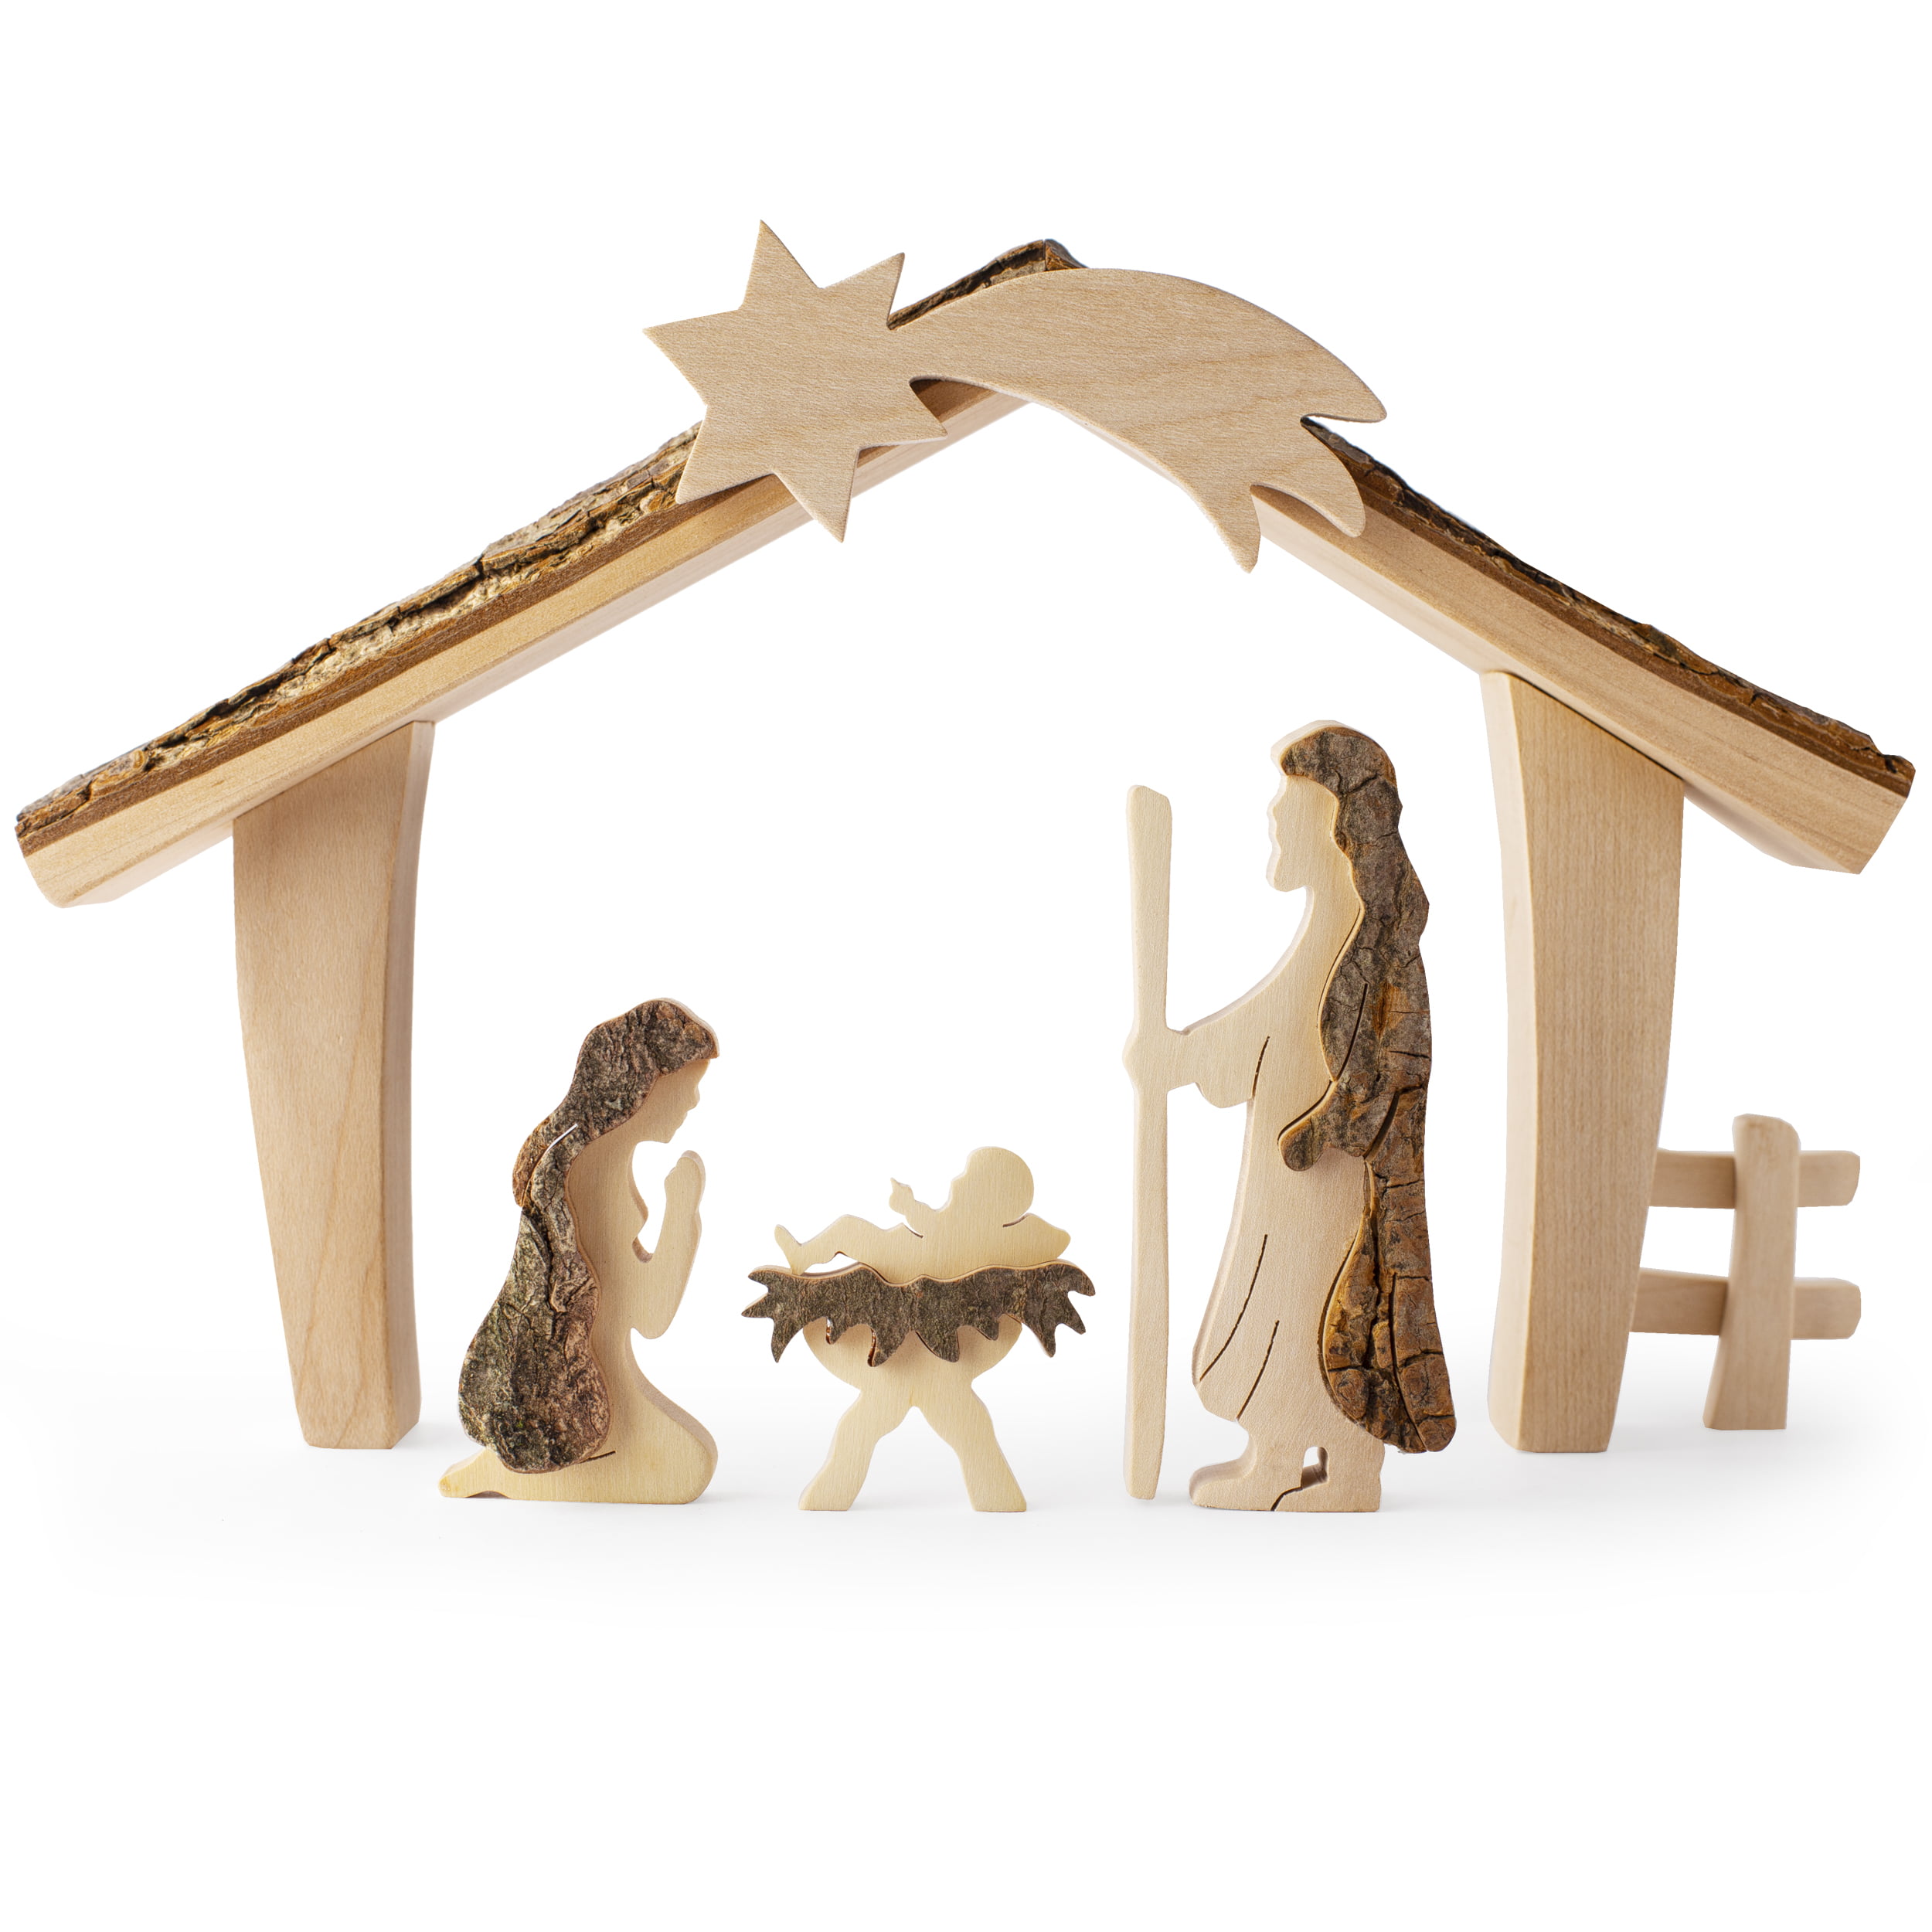 ONE XMAS NATIVITY BABY JESUS CAKE TOPPER 2 INCHES TALL DISPLAY? DOLLS HOUSE? 